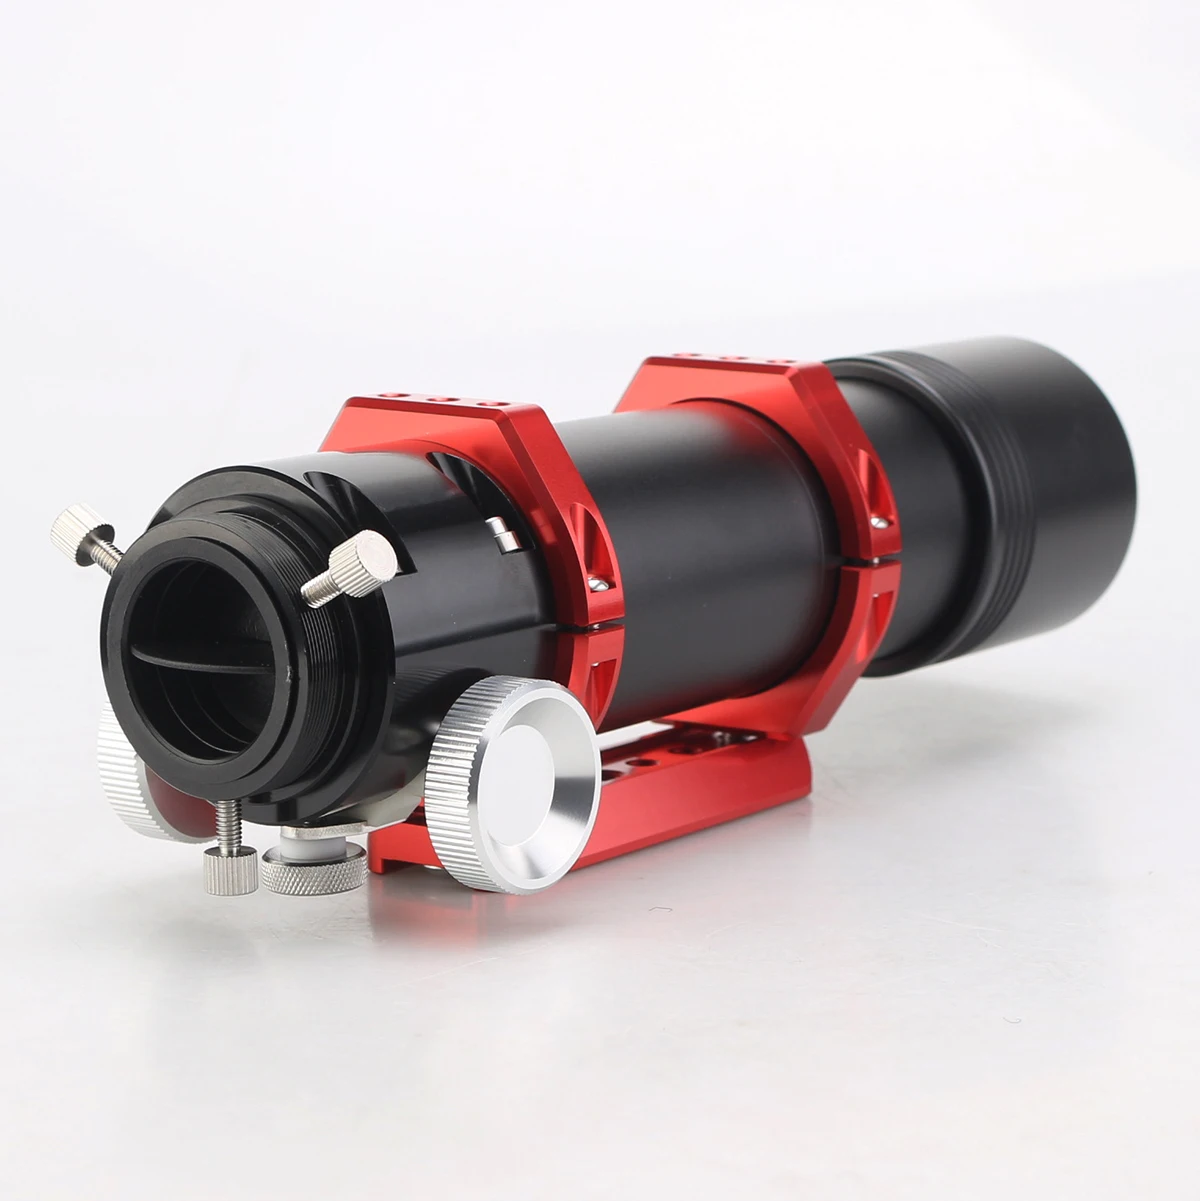 New 50mm f/4 Fully Metal Multifunctional Guide Scope Refractor Telescope Optical Tube for Auto Guiding Cameras FinderscopLD2048A